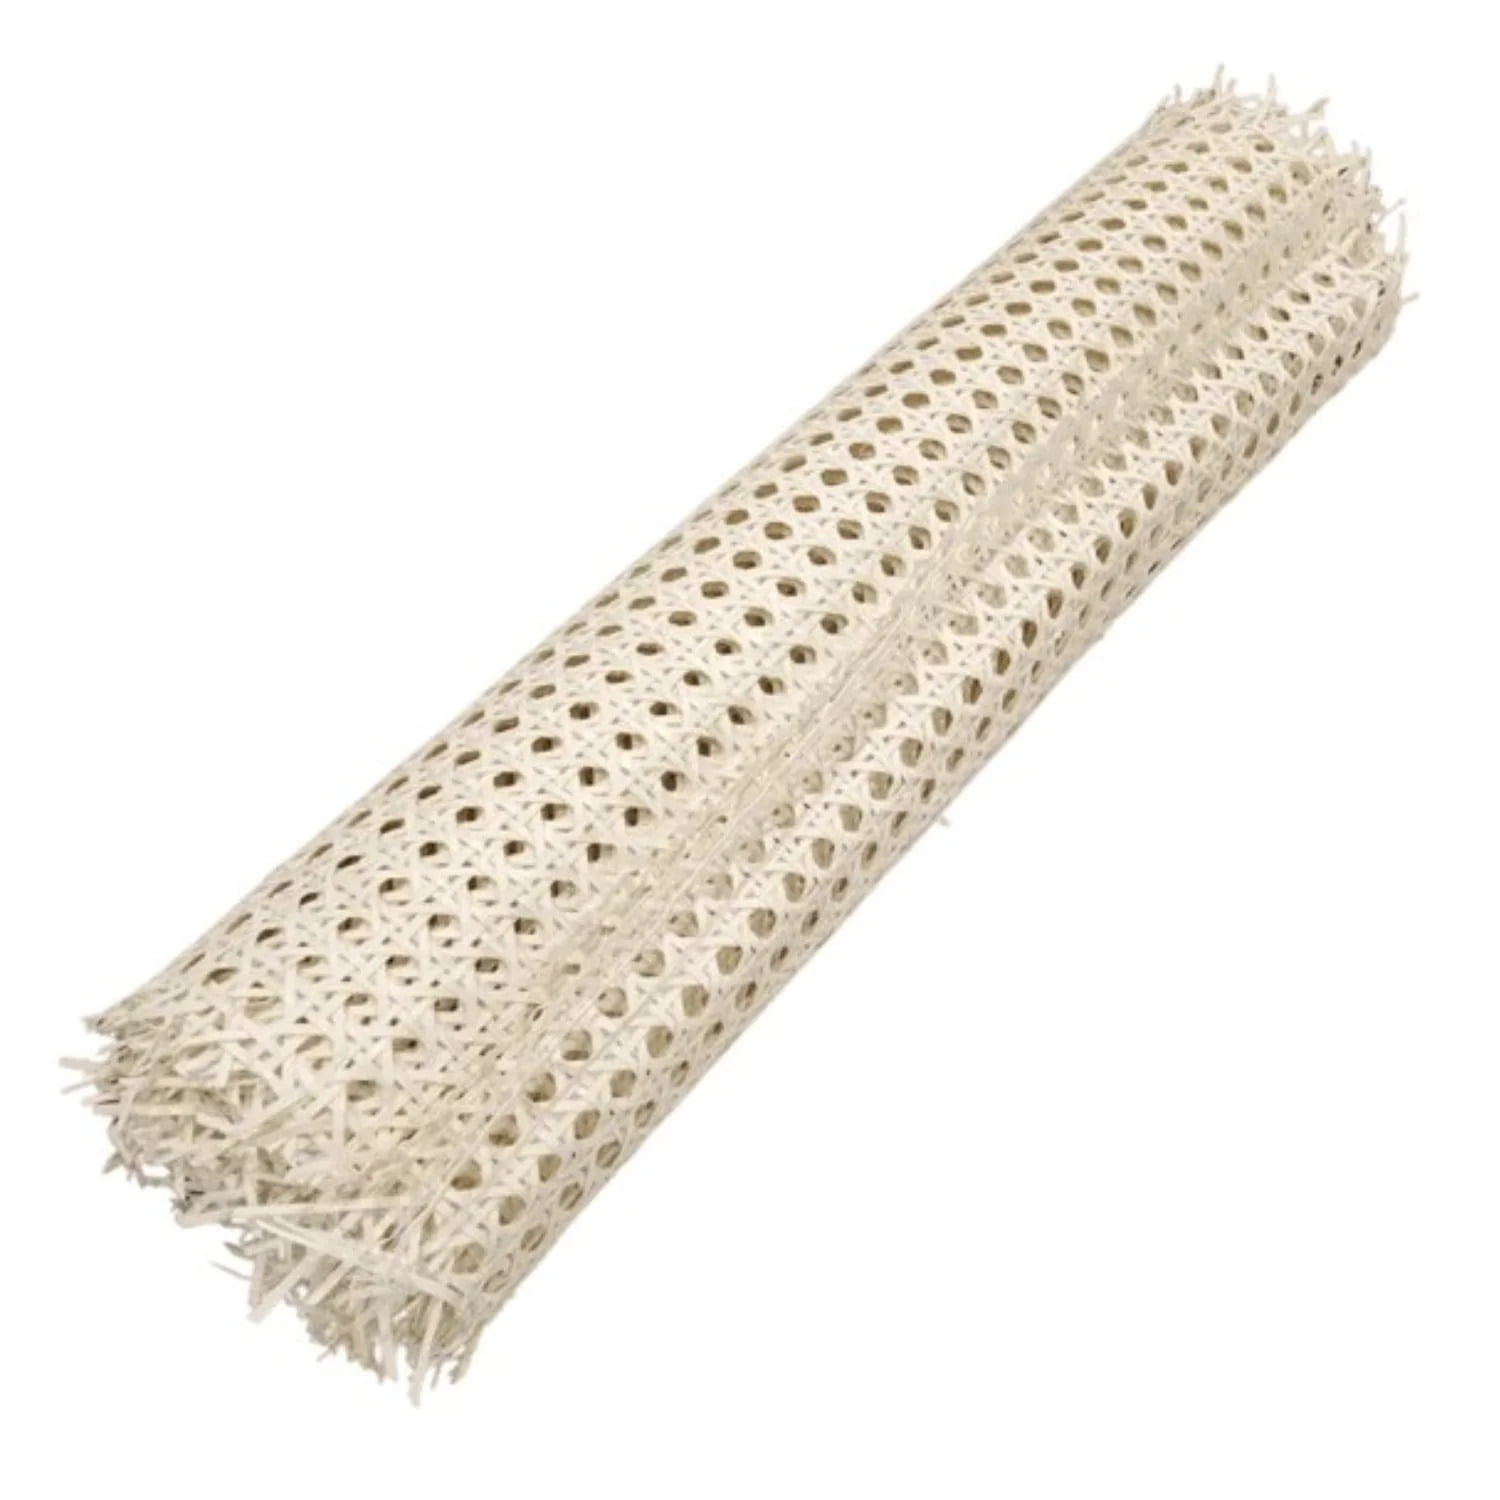 18 Width Rattan Cane Webbing Roll 2 Feet Hexagon Weave Rattan Fabric Furniture Woven Rattan Sheets for Crafts Cane Weave Rattan Material Natural